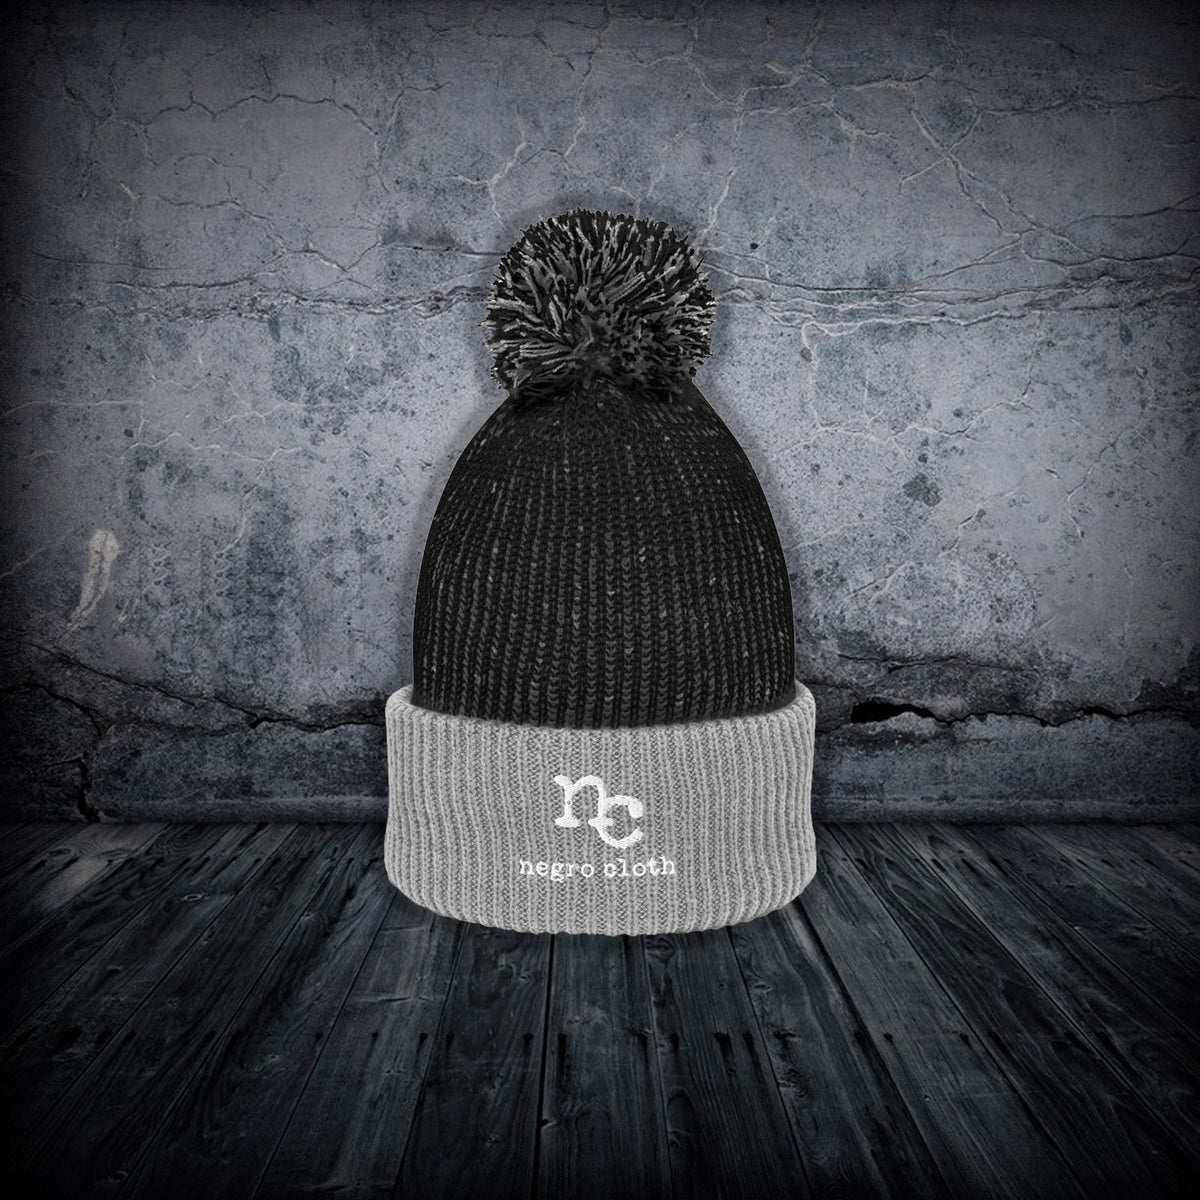 Speckled Black and White Knit Beanie Cap